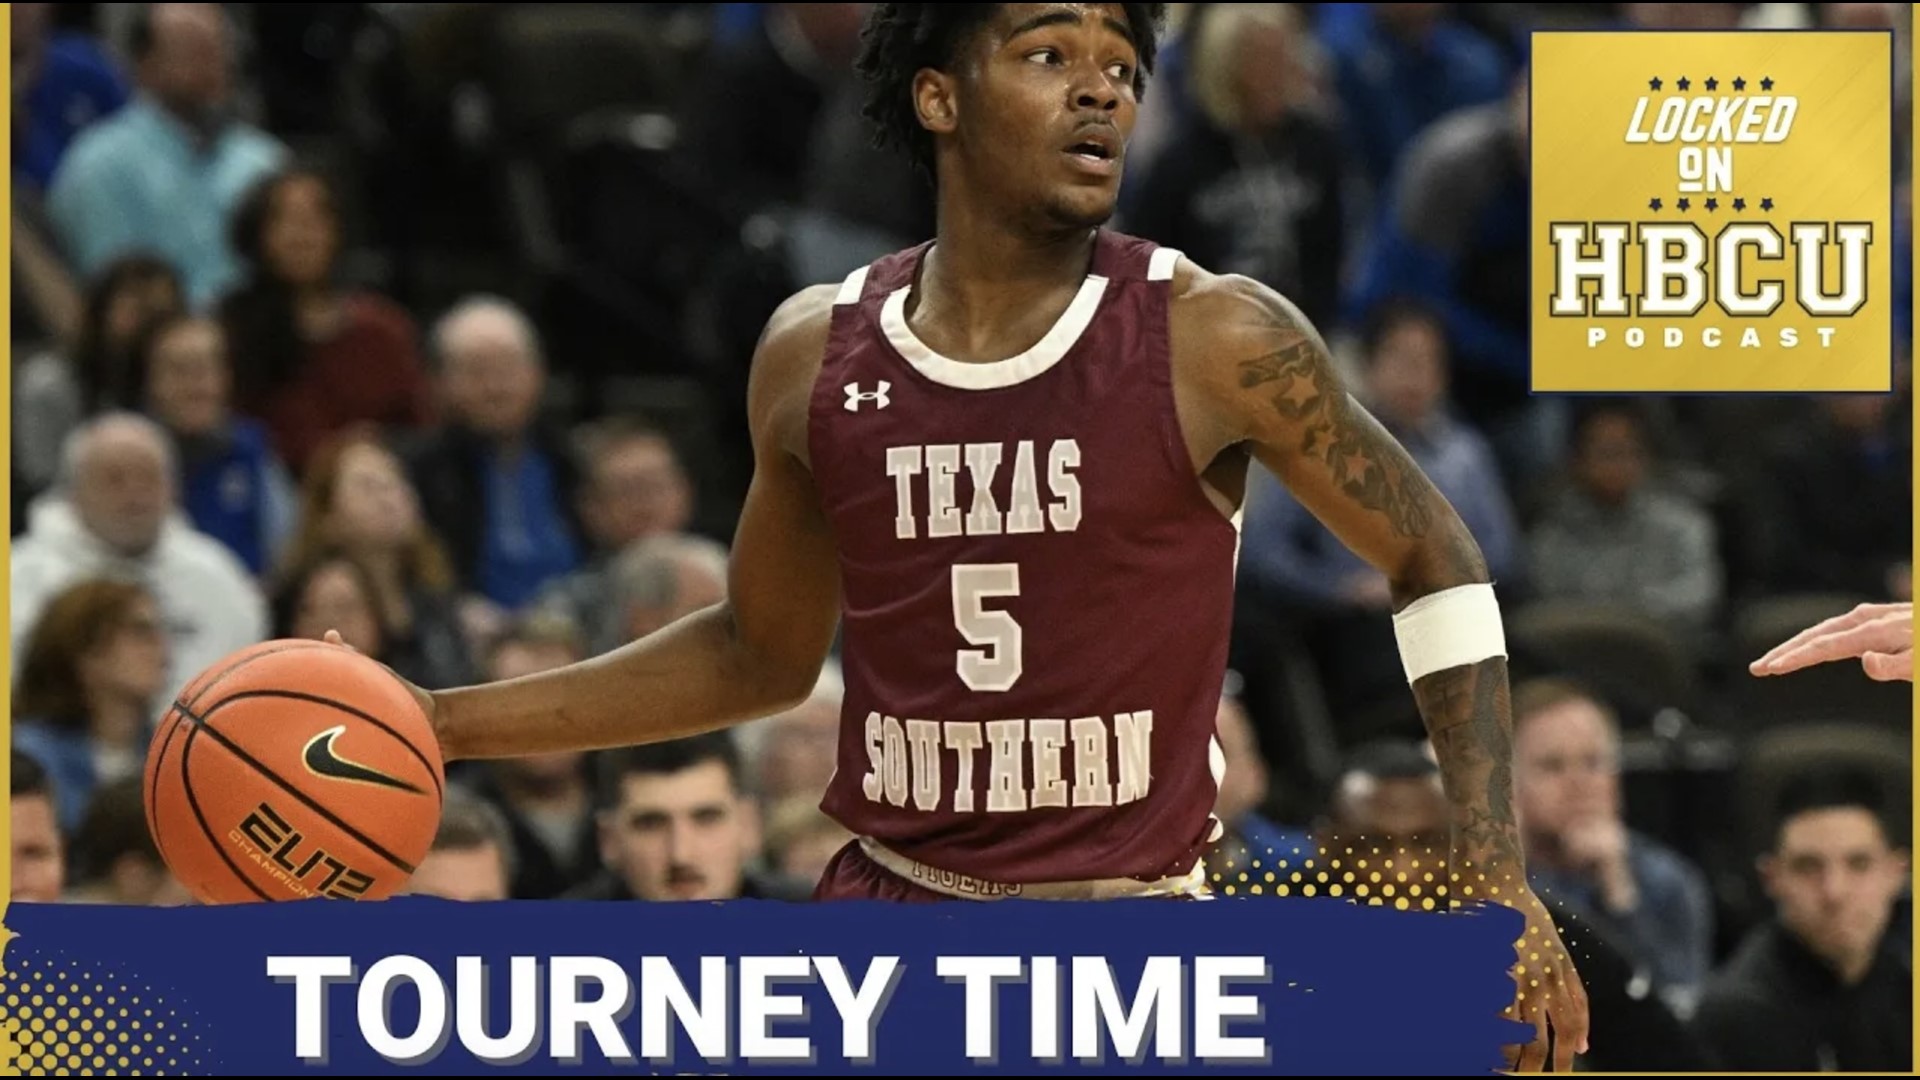 Texas Southern vs Jackson State, Southern vs Bethune Cookman, Howard vs Morgan State & Delaware State vs South Carolina State are the games to watch